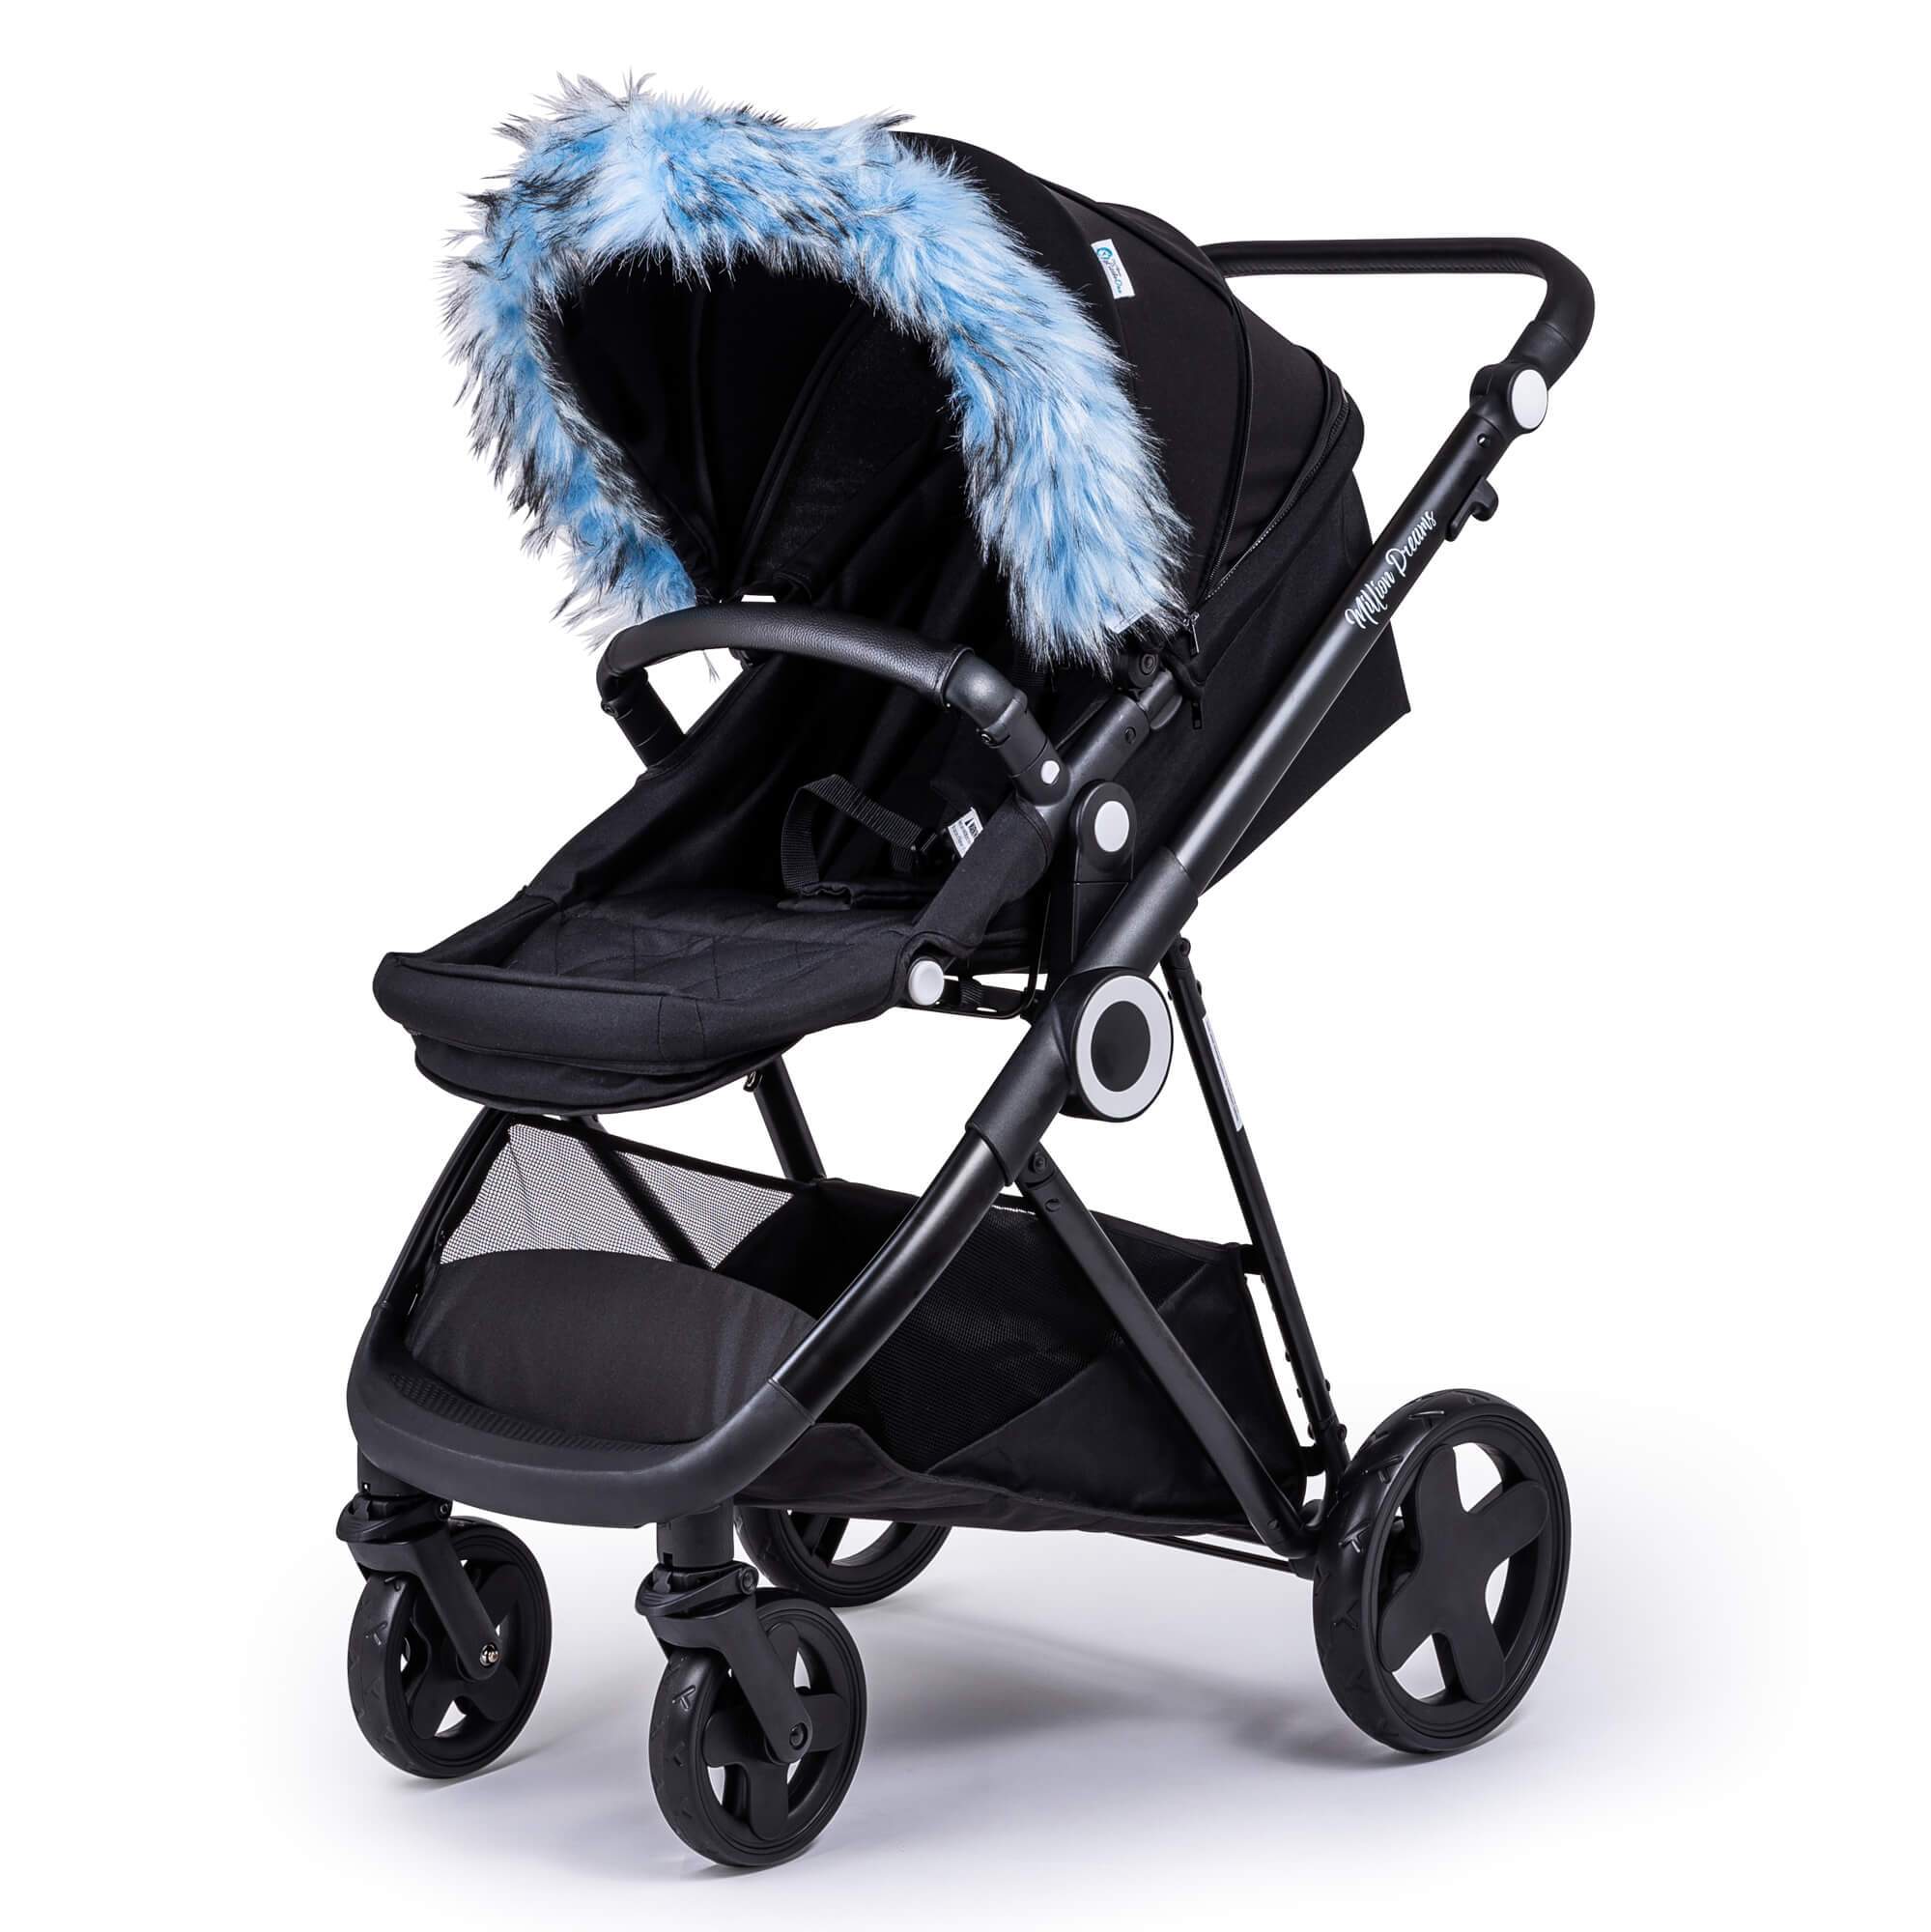 Pram Fur Hood Trim Attachment for Pushchair Compatible with Gesslein - Light Blue / Fits All Models | For Your Little One